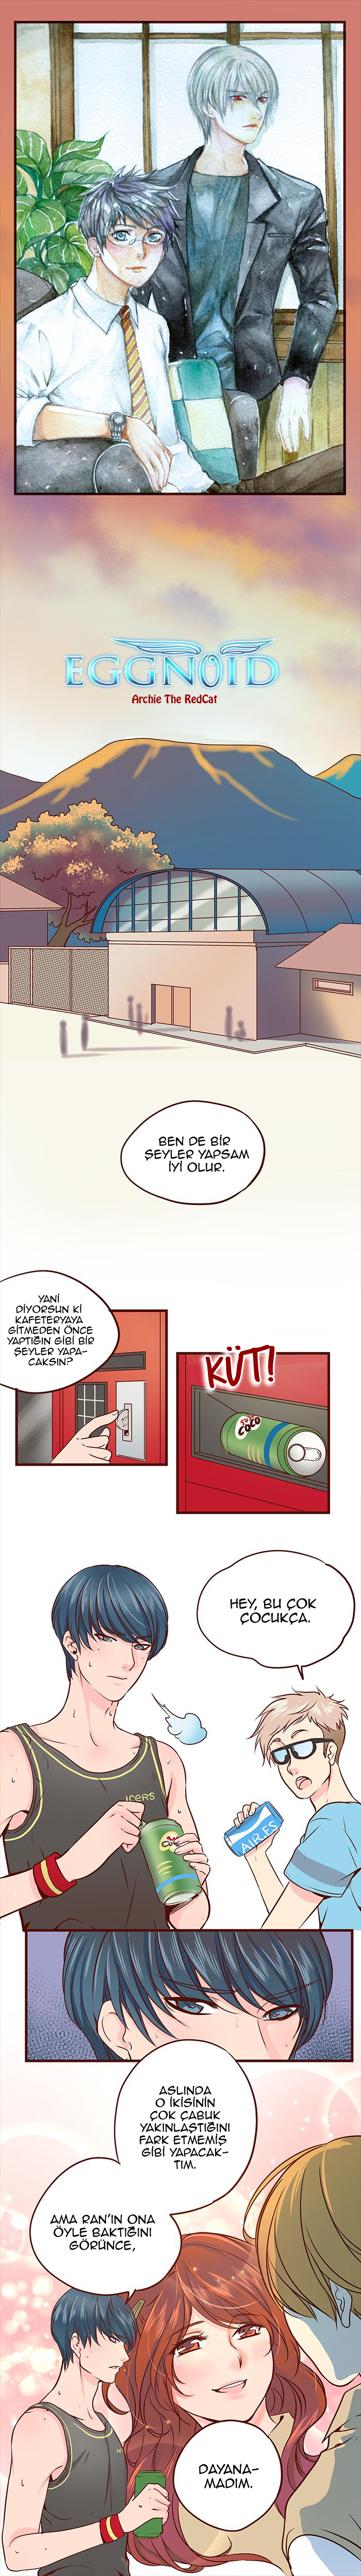 Eggnoid: Chapter 83 - Page 2